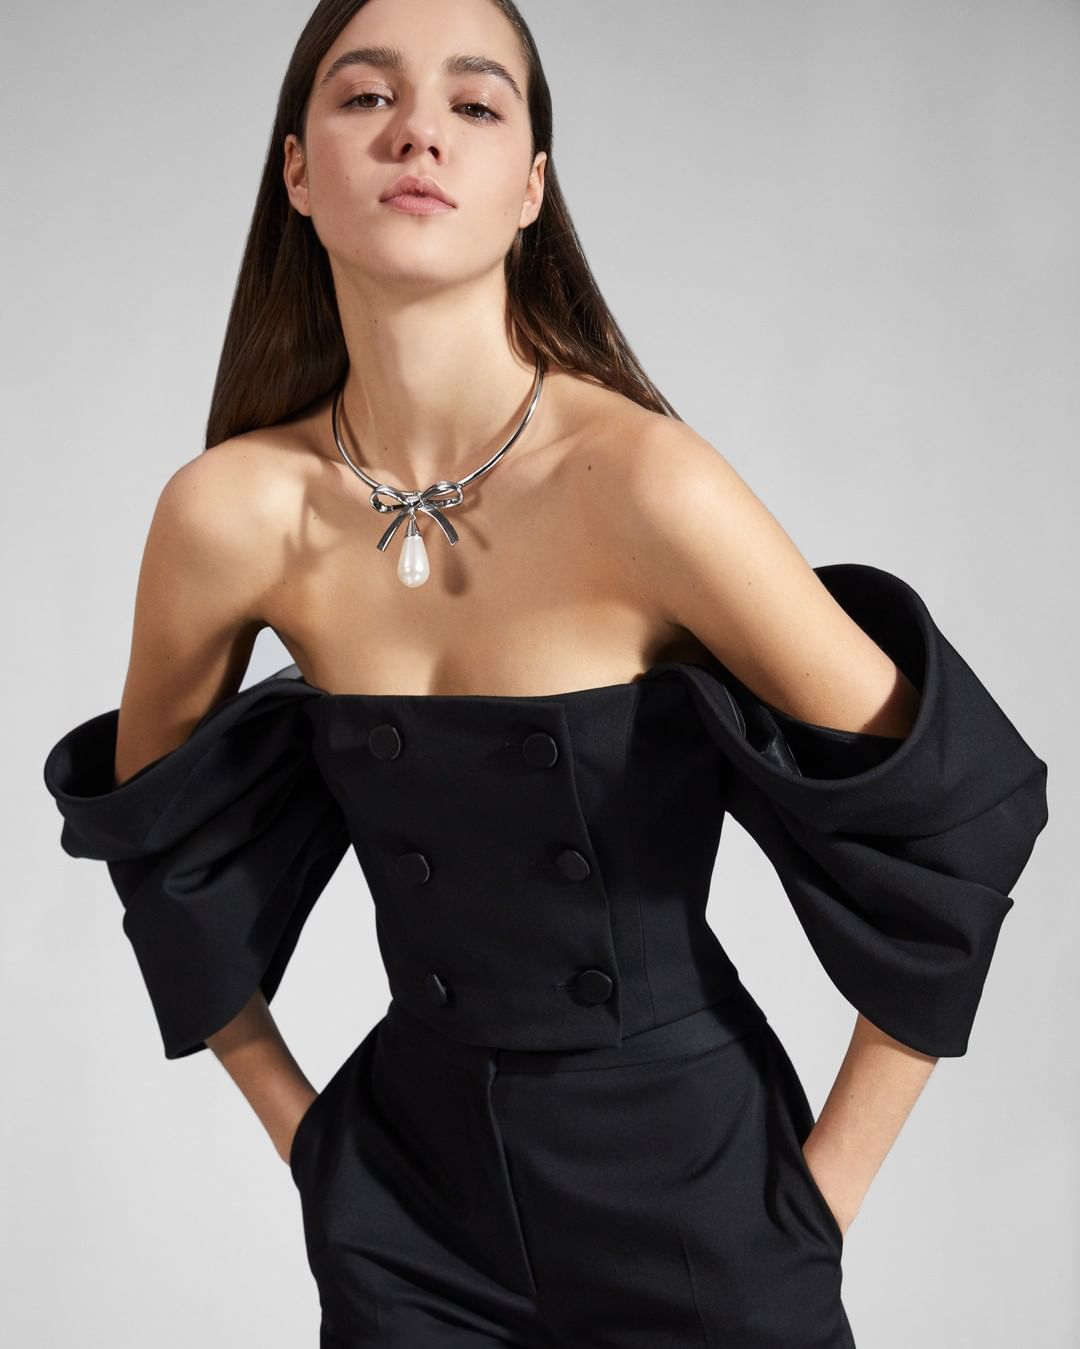 CAROLINA HERRERA - Make a sartorial statement in this double-breasted corset top from the #prefall2020 collection by @wesgordon, beautifully tailored in Italian stretch virgin wool with dramatic side...